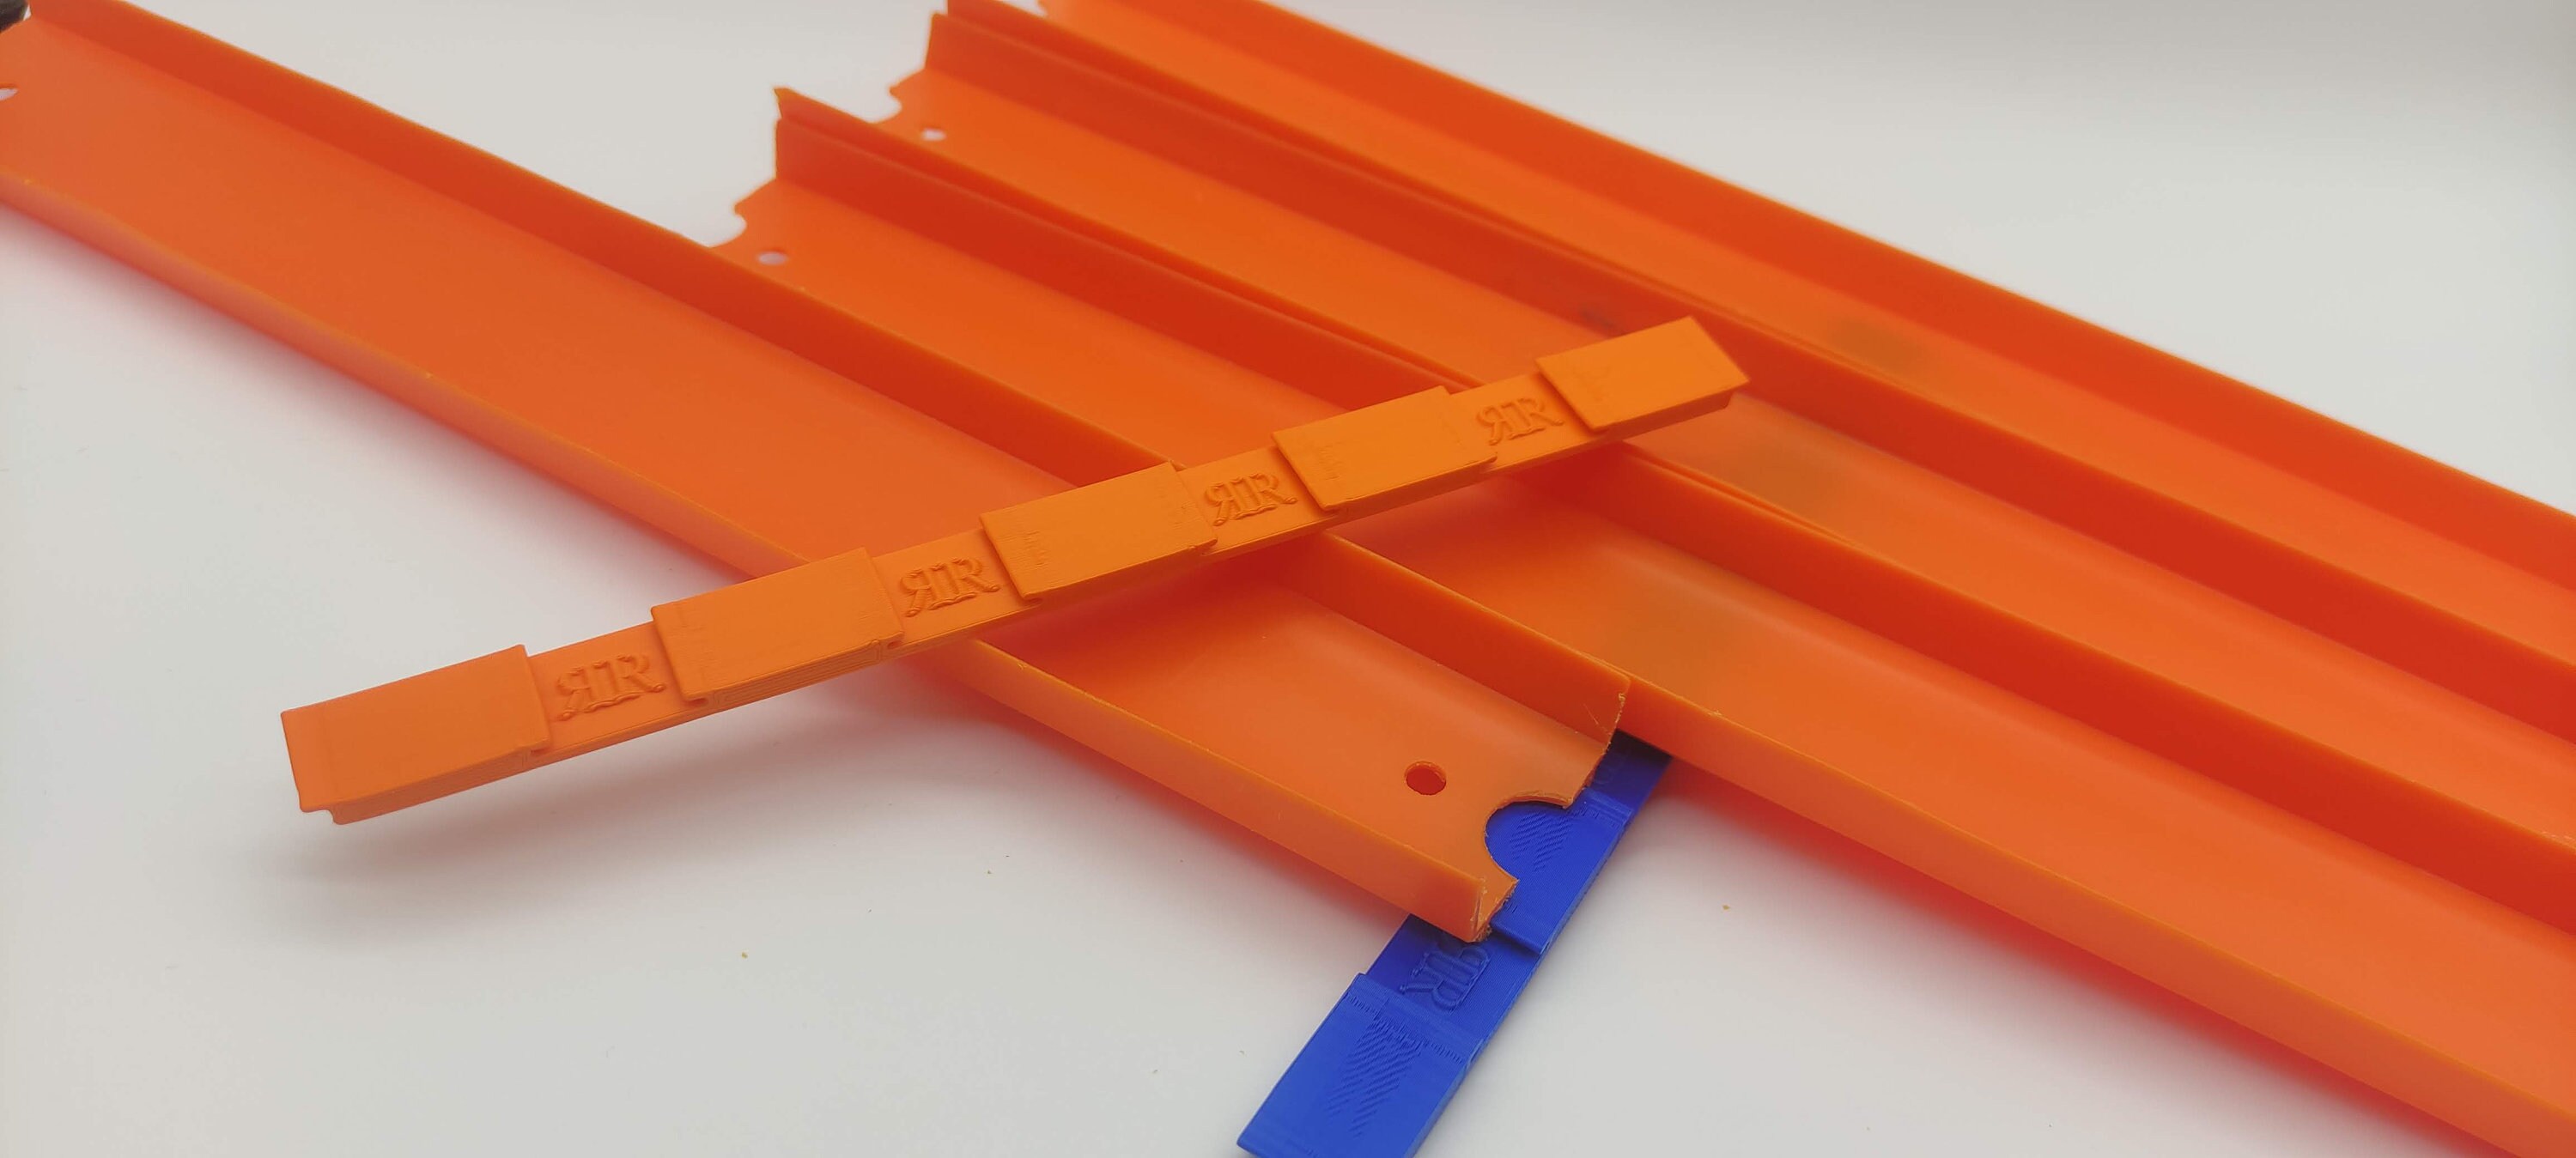 Hot wheels track connector